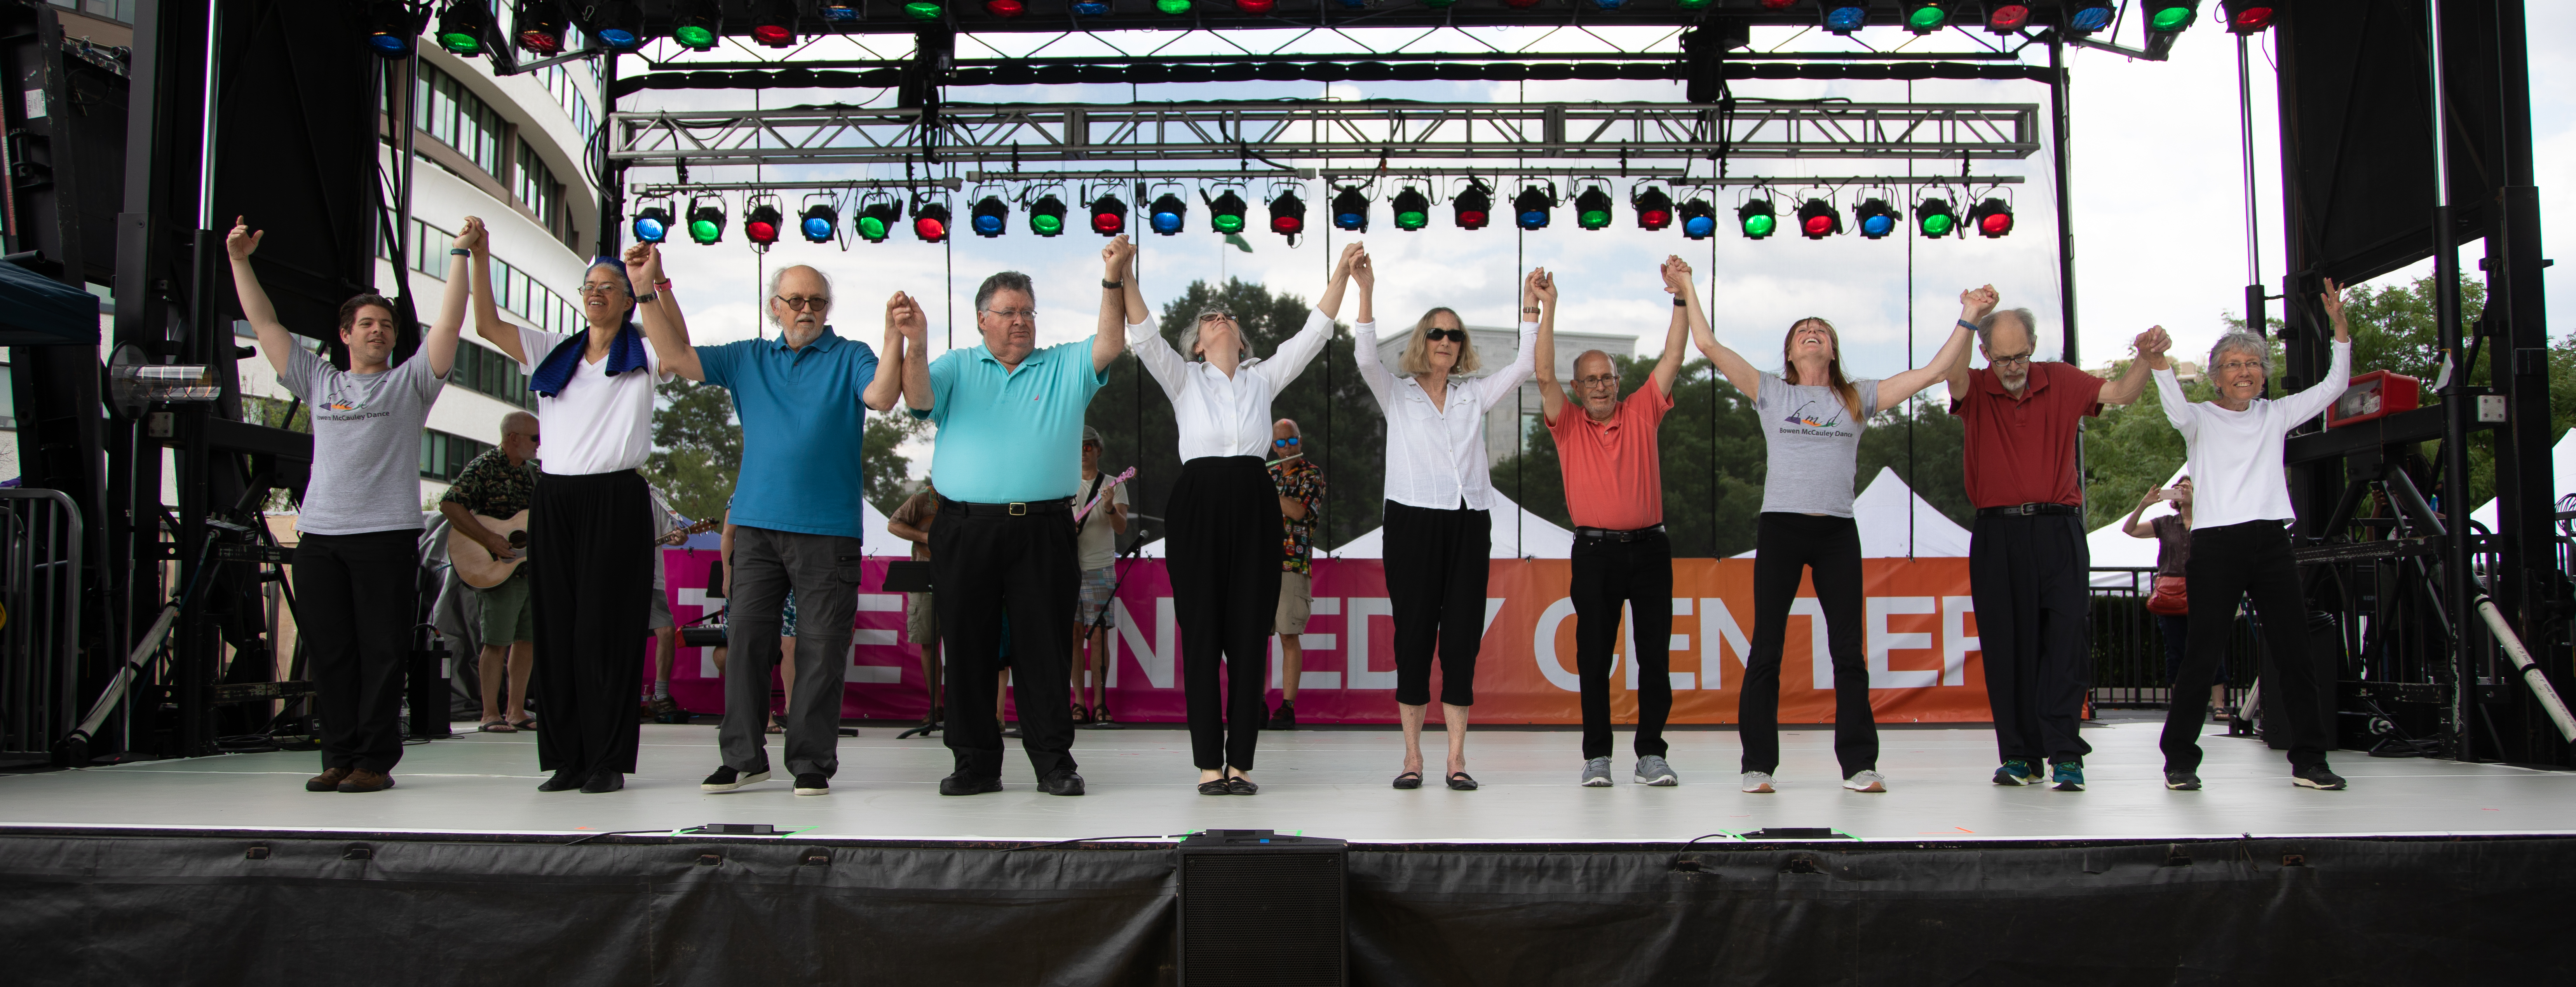 Participants in the Dance for PD program stand in a row with their hands raised triumphantly on an outdoor stage at the Kennedy Center.